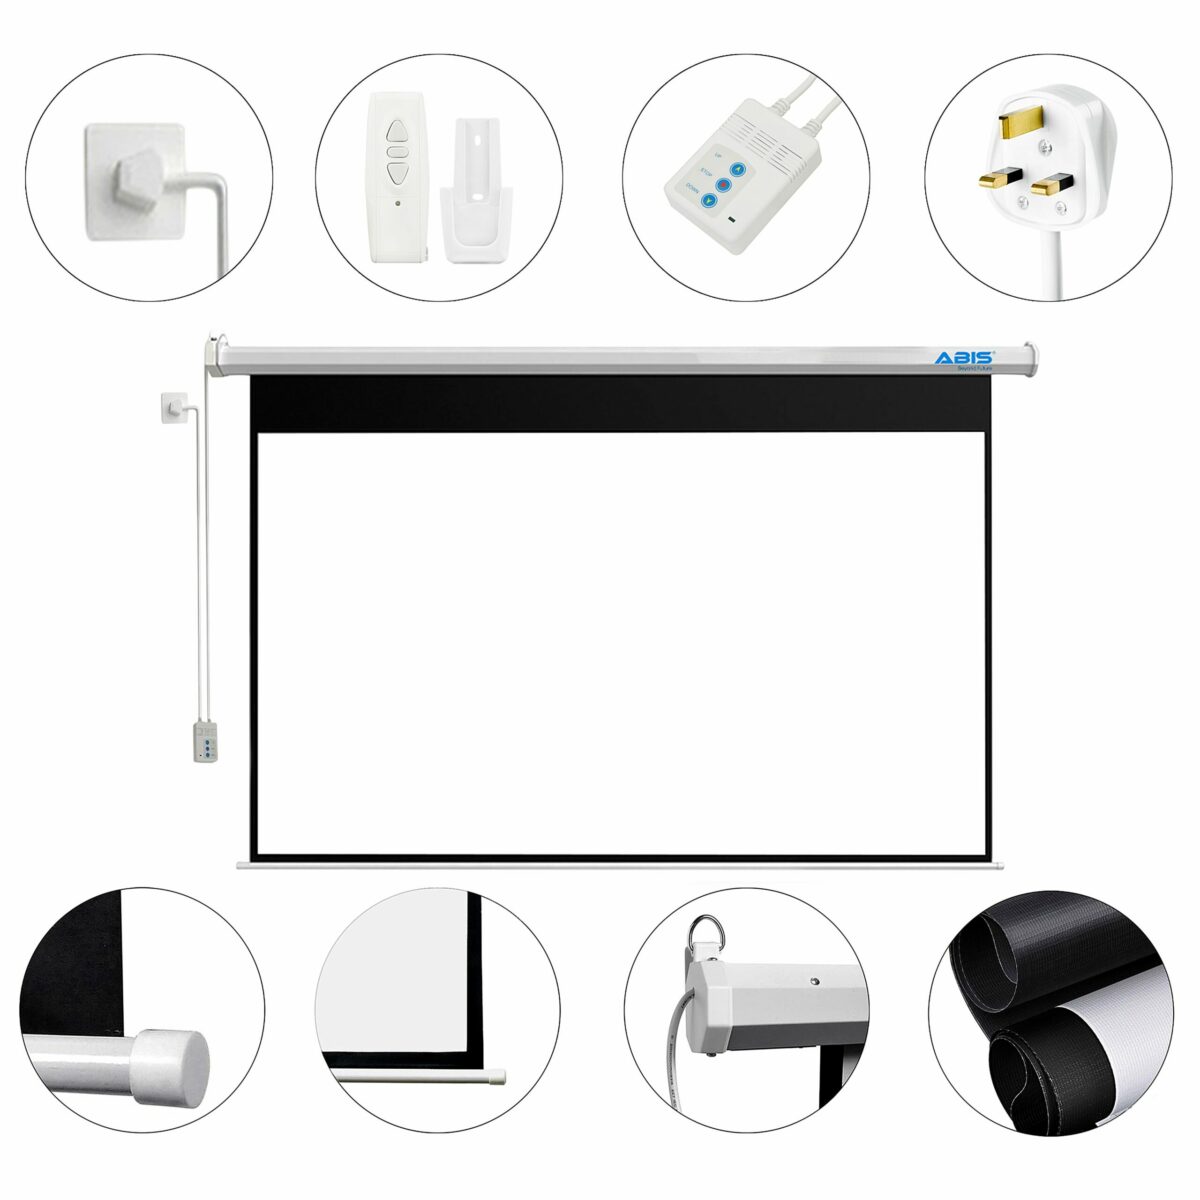 Electric Projector Screen 84" inches 16:9 Aspect Ratio Resolution FHD, 2K to 8K - ABIS